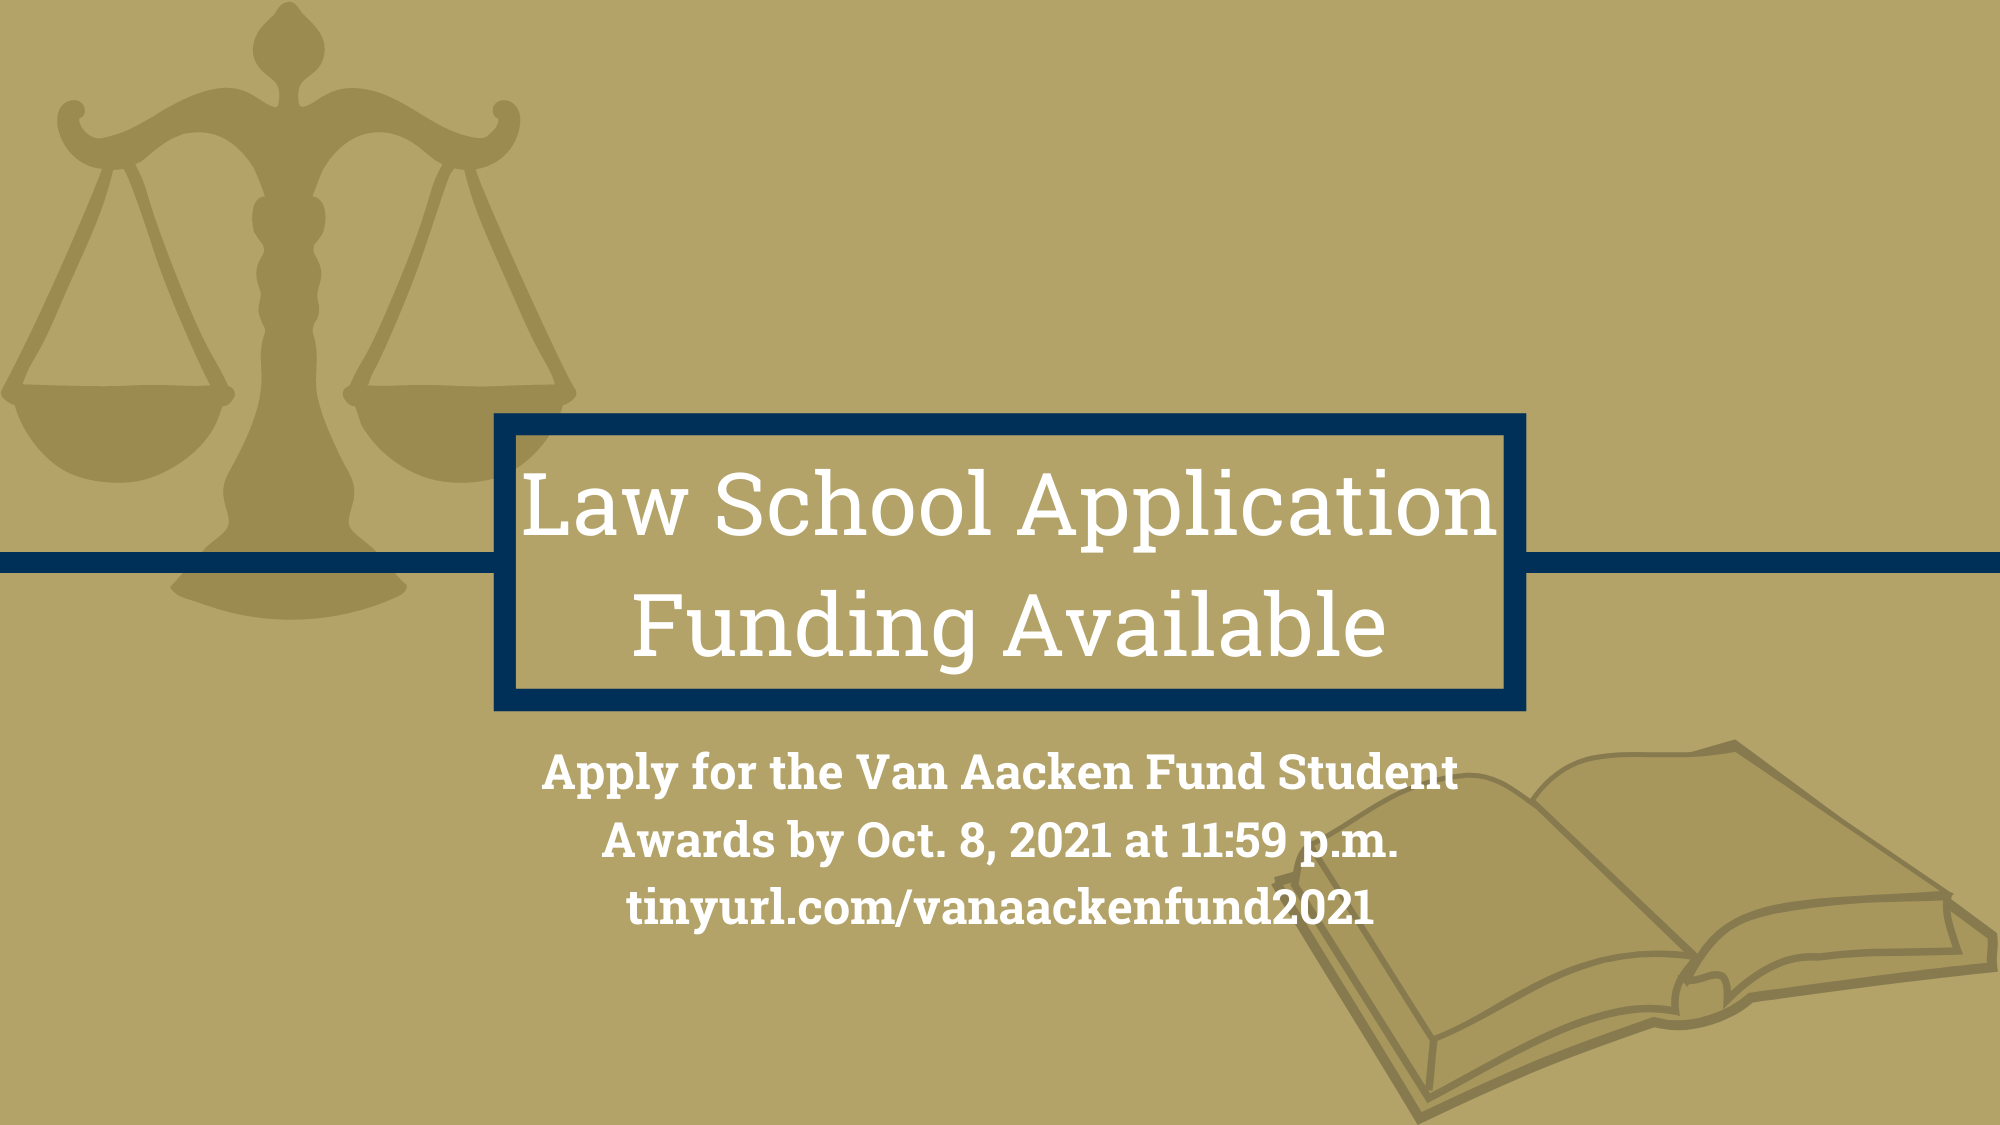 Applications for funding to offset the cost of law school applications are open until Friday, Oct. 8, 2021.